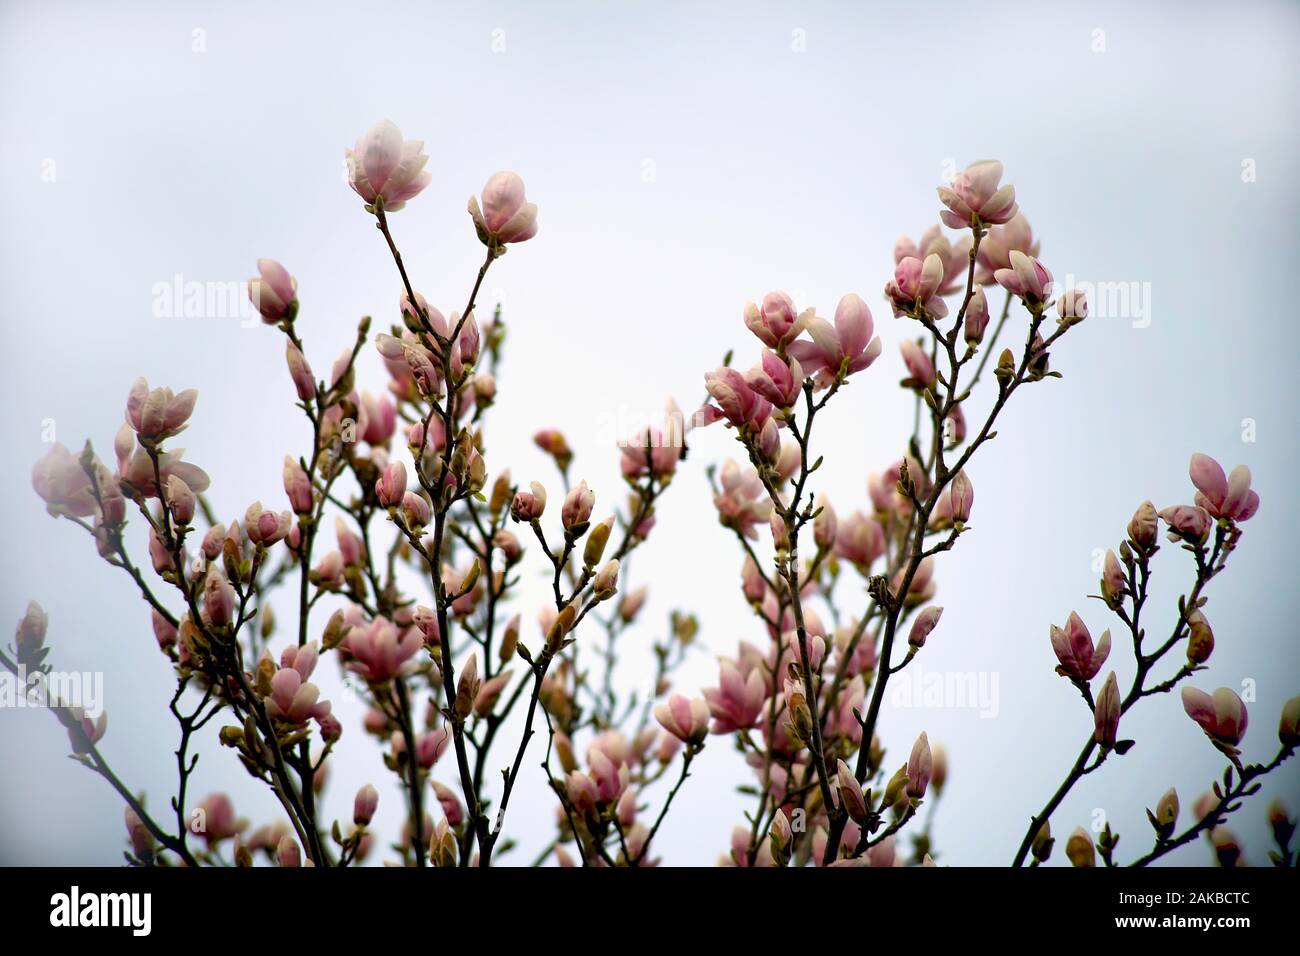 Magnolia pink blossom tree flowers on the fog, close up branch, outdoor. Magnolia genus flowering plant. Stock Photo